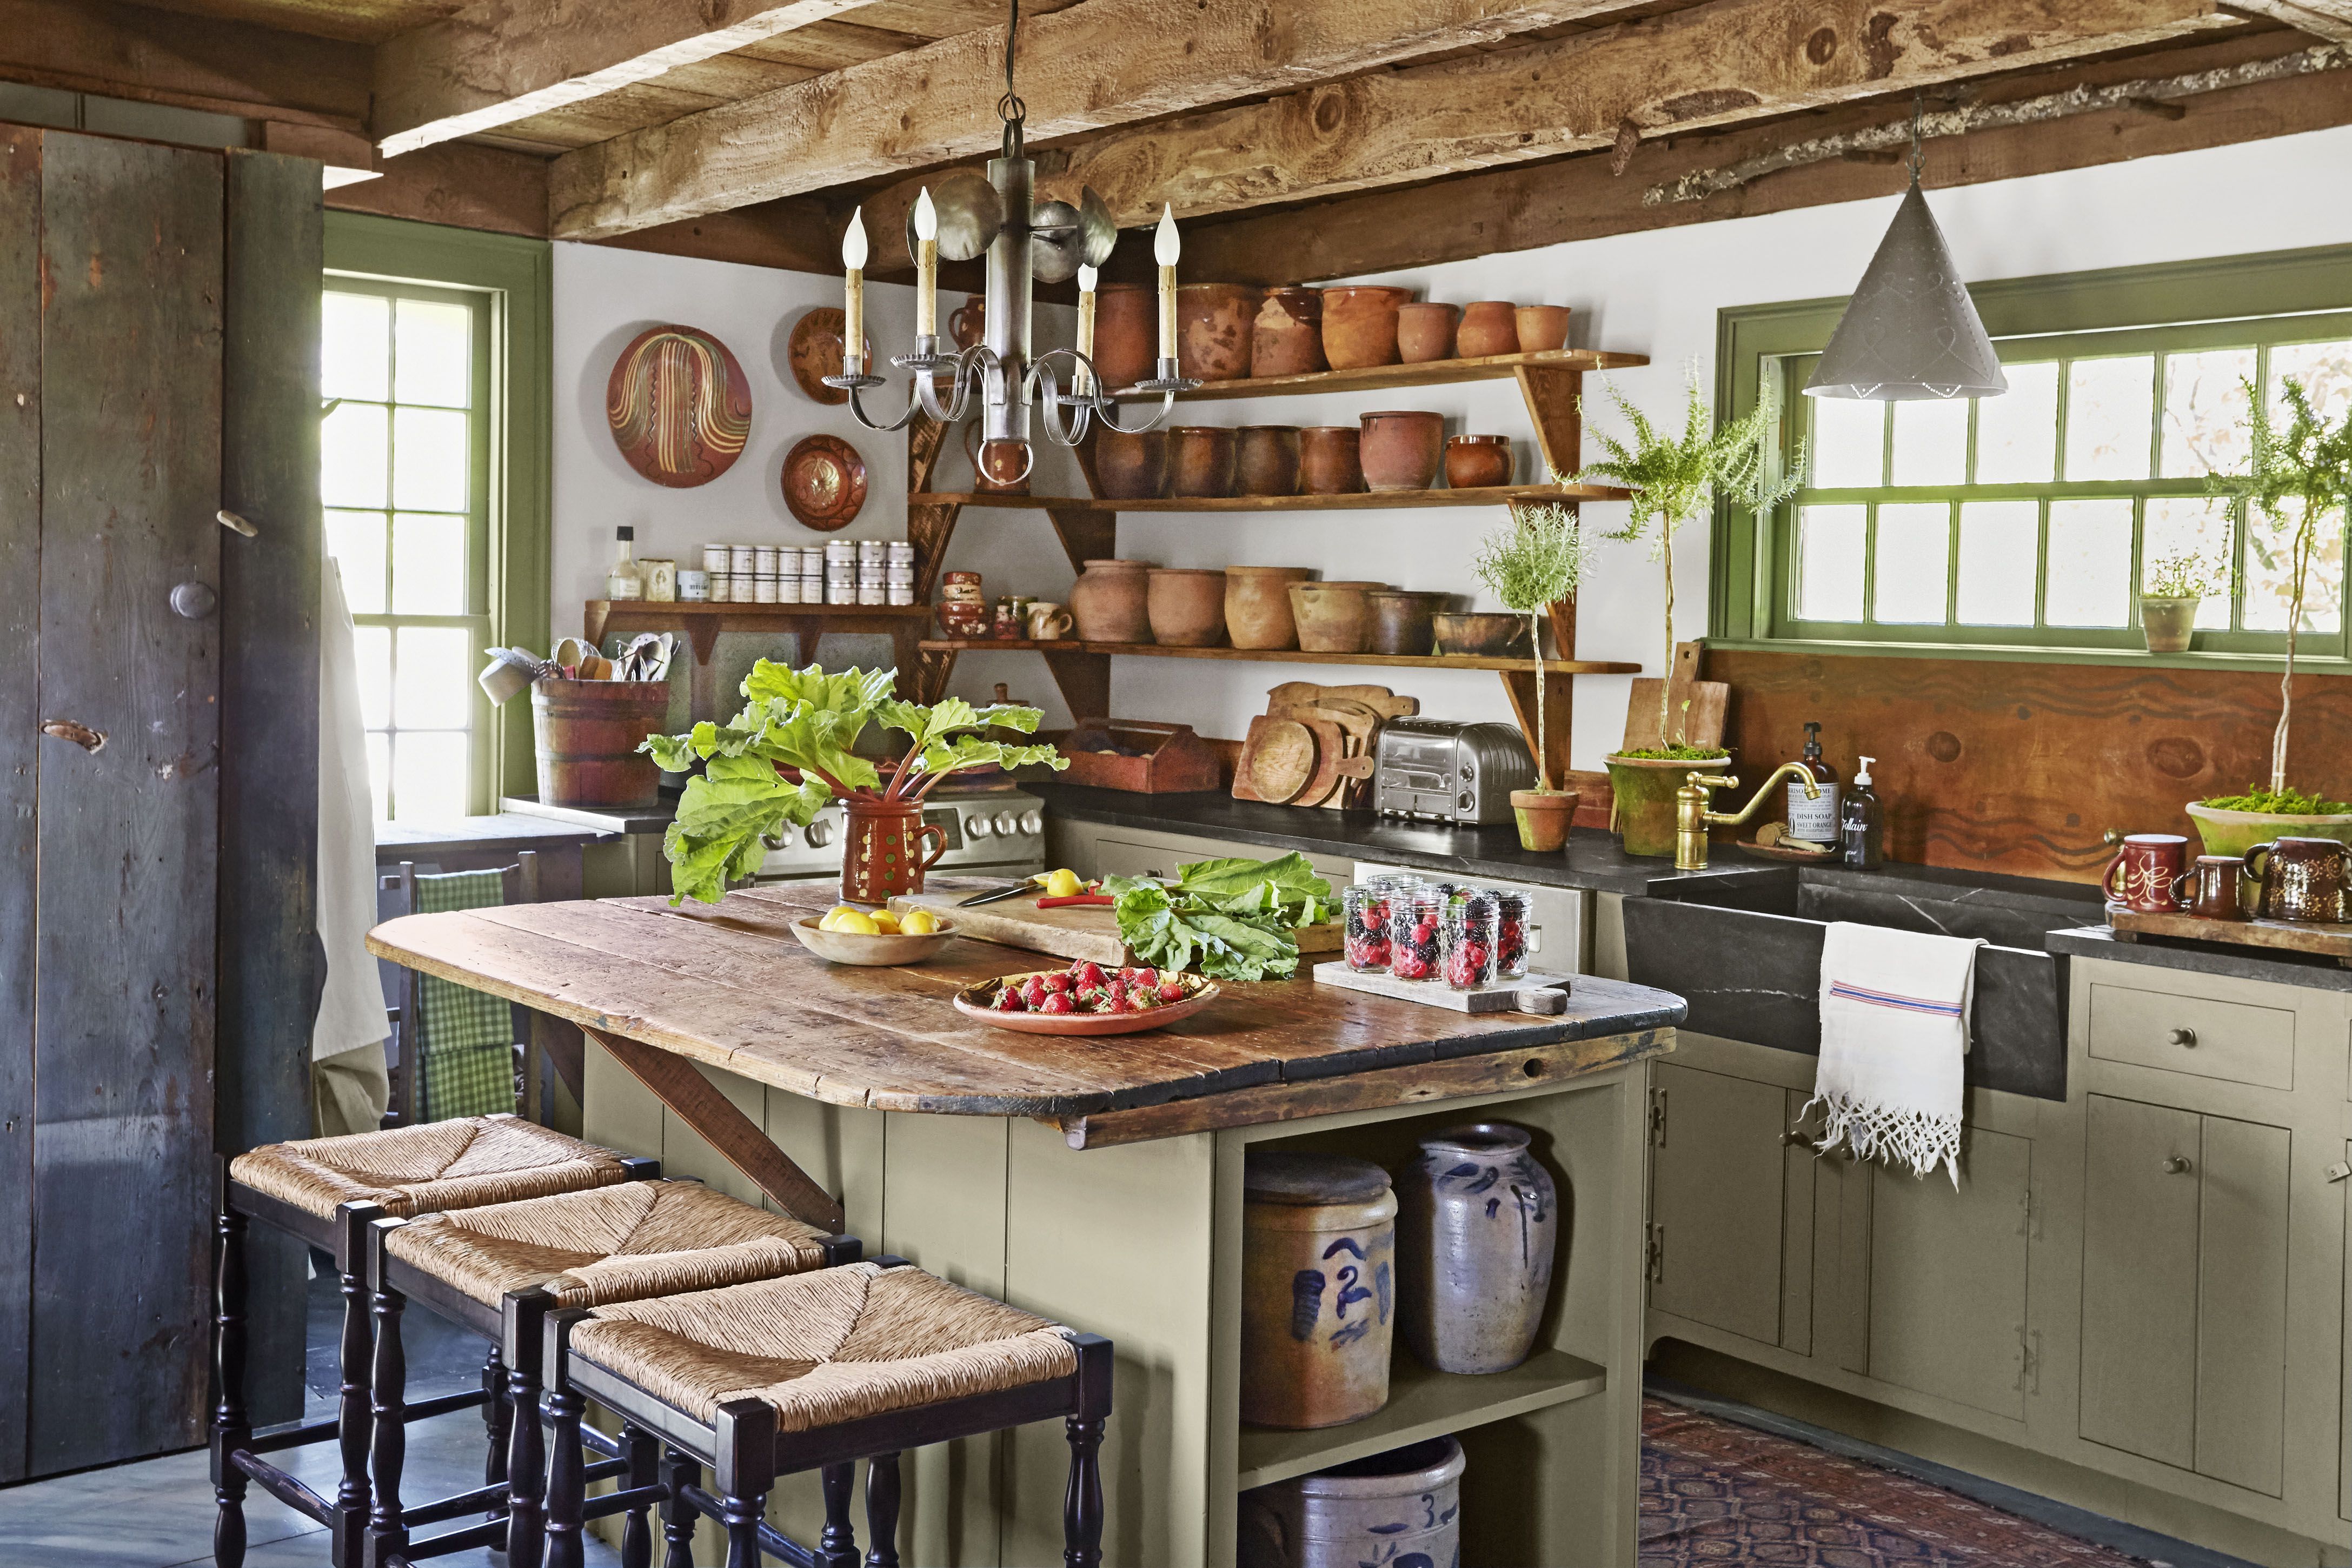 34 Farmhouse Style Kitchens Rustic Decor Ideas For Kitchens,What Is The Biggest Cruise Ship In The World 2020